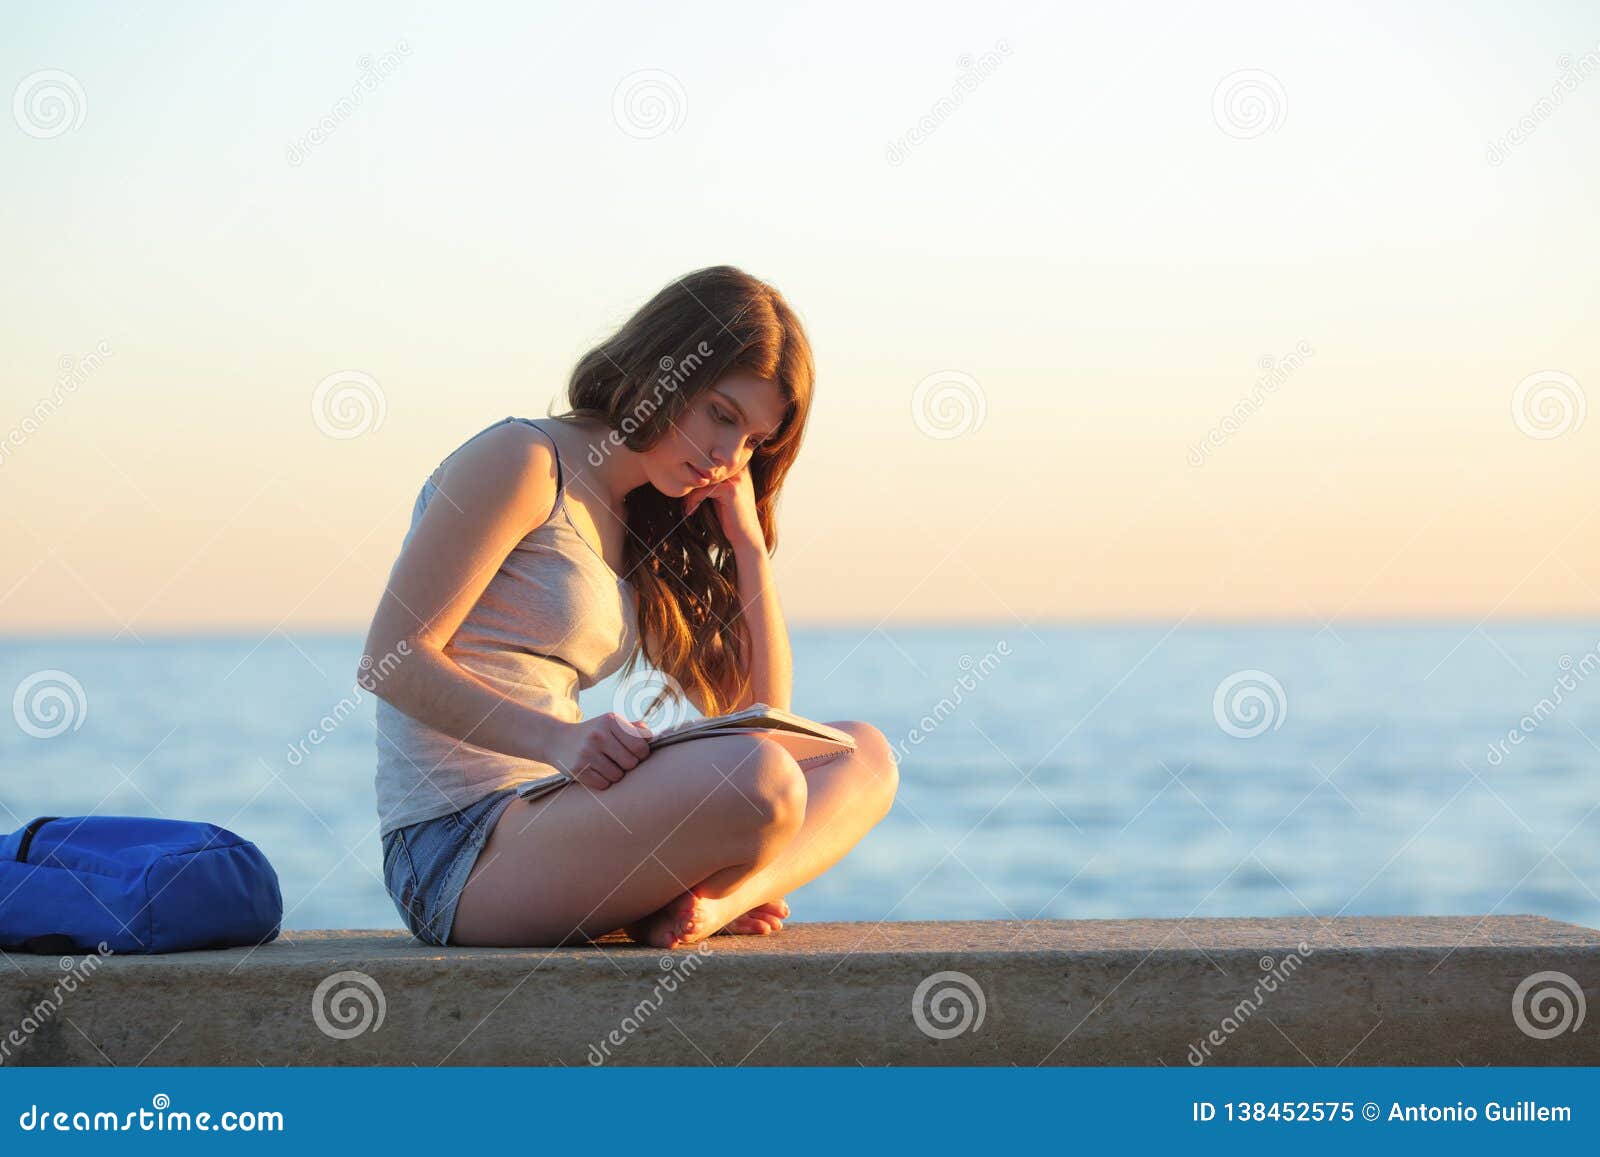 student learning memorizing notes on the beach